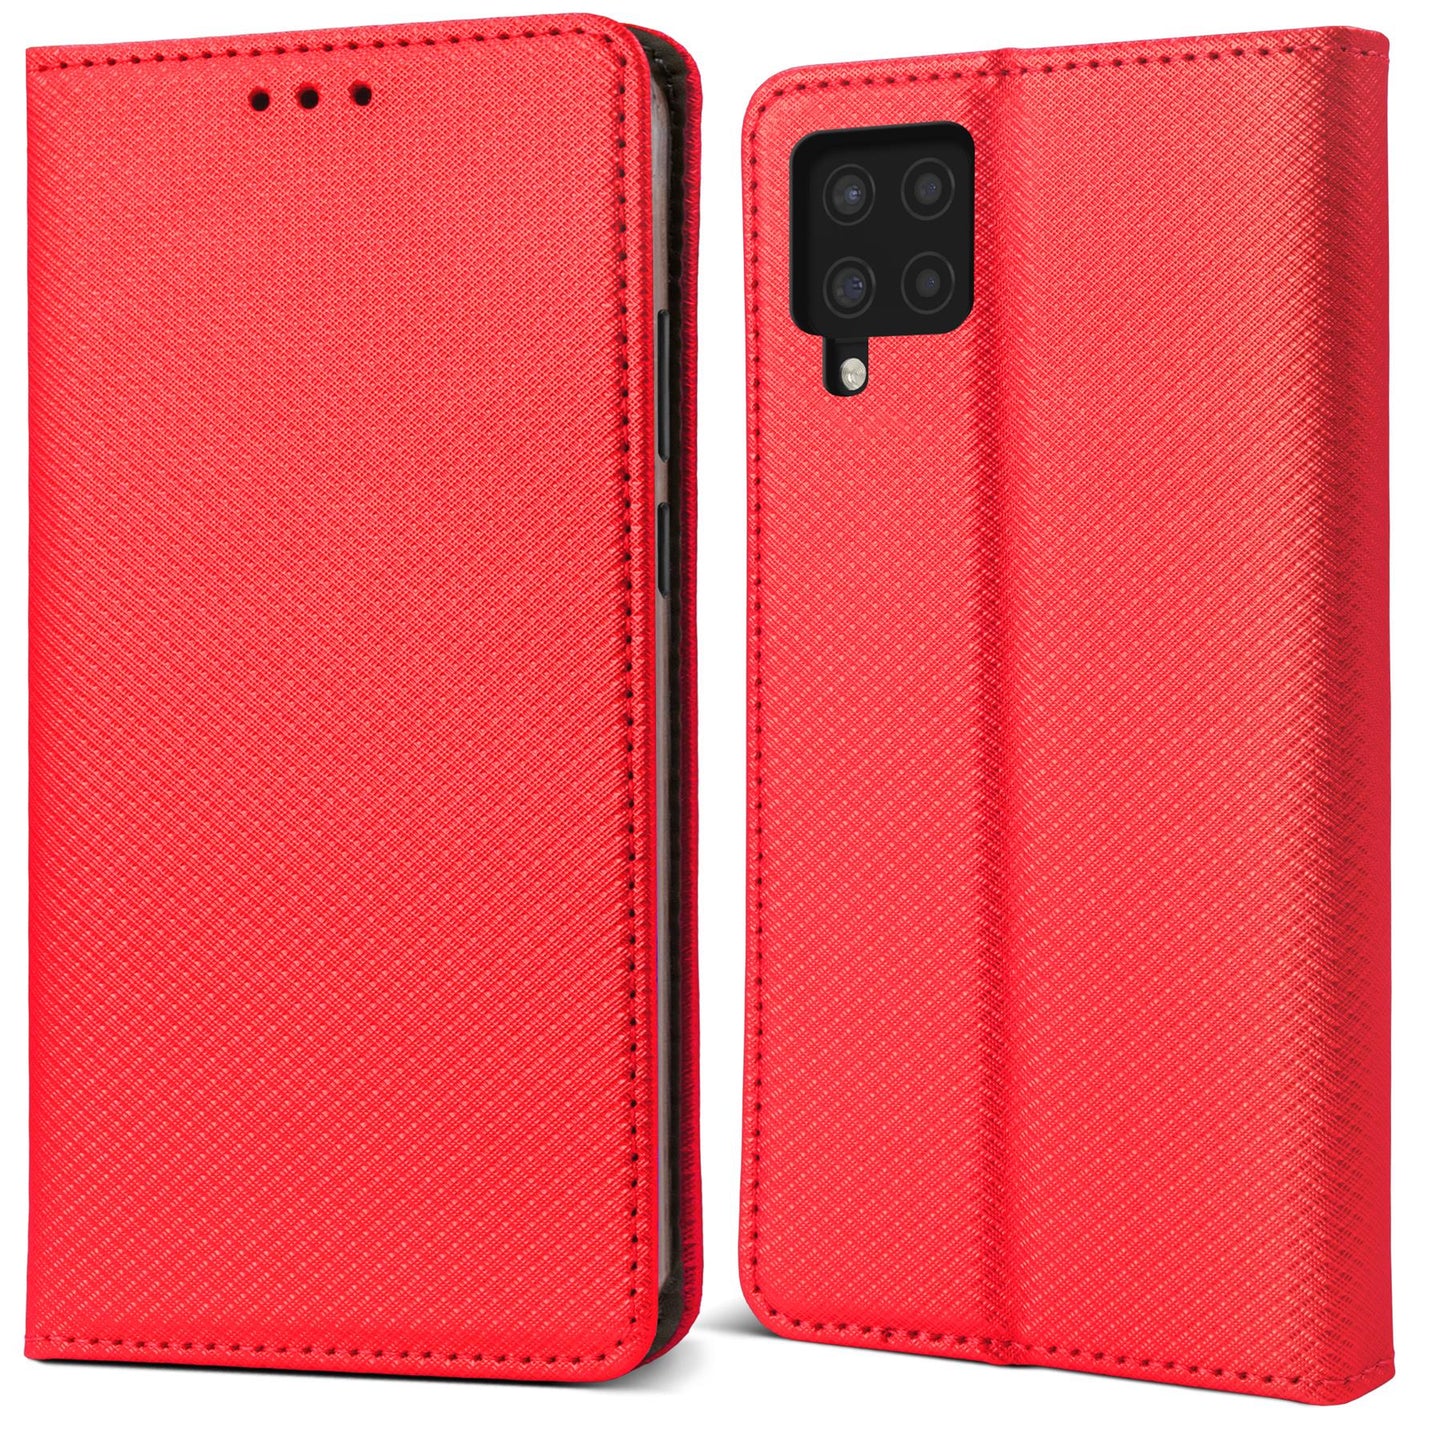 Moozy Case Flip Cover for Samsung A22 4G, Red - Smart Magnetic Flip Case Flip Folio Wallet Case with Card Holder and Stand, Credit Card Slots, Kickstand Function